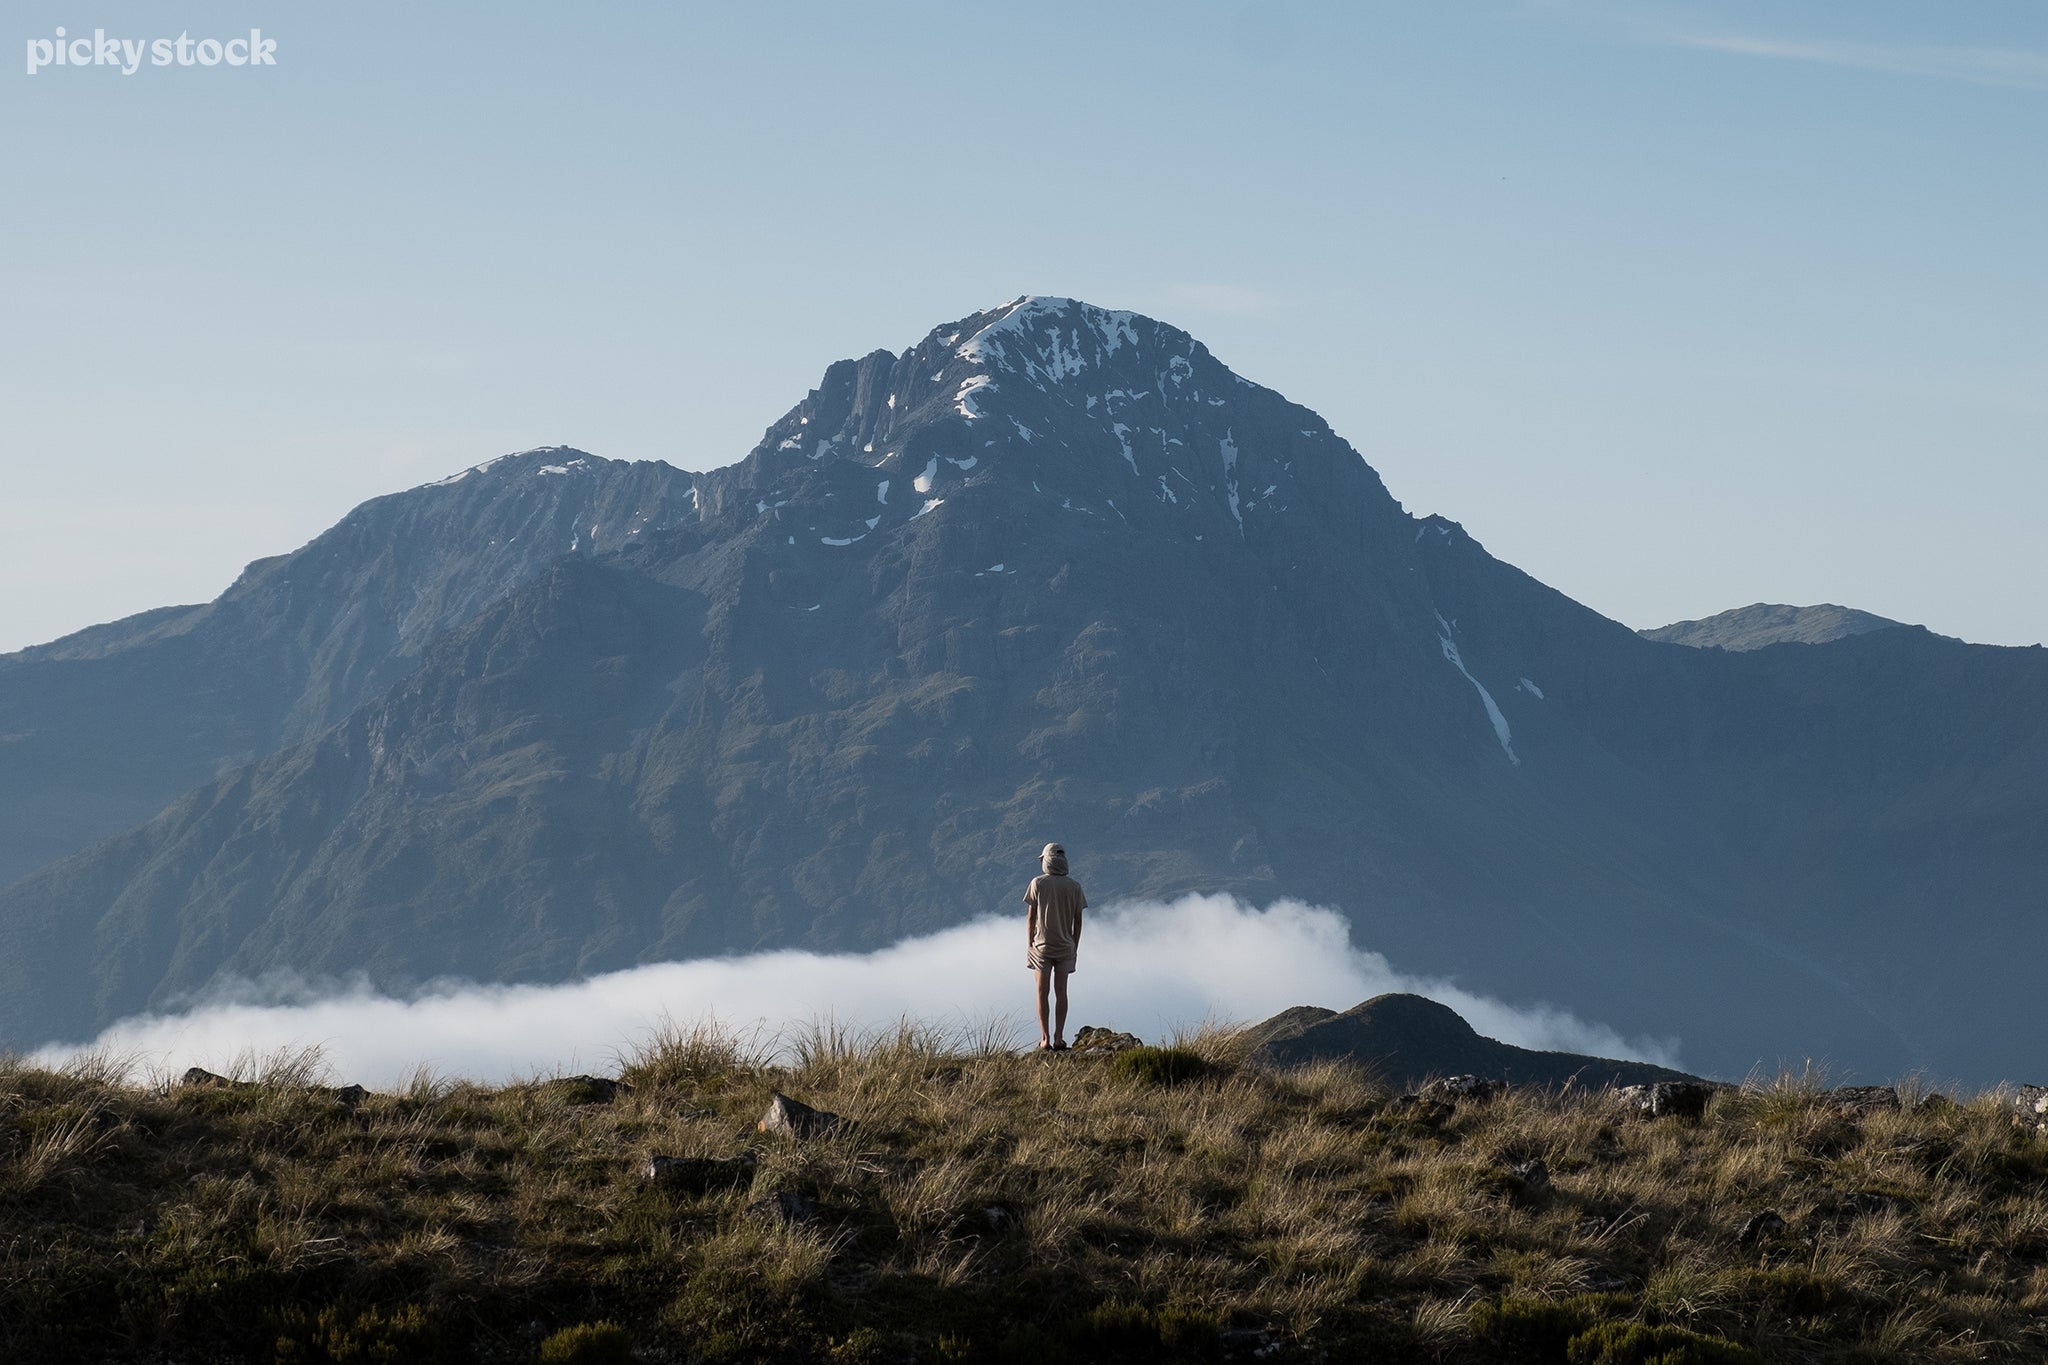 Landscape of a person standing atop a grassy hill overlooking a swell of dense white fog crawling through the valley while a snowy mountain reaches high above overwhelming the ground below in shade.